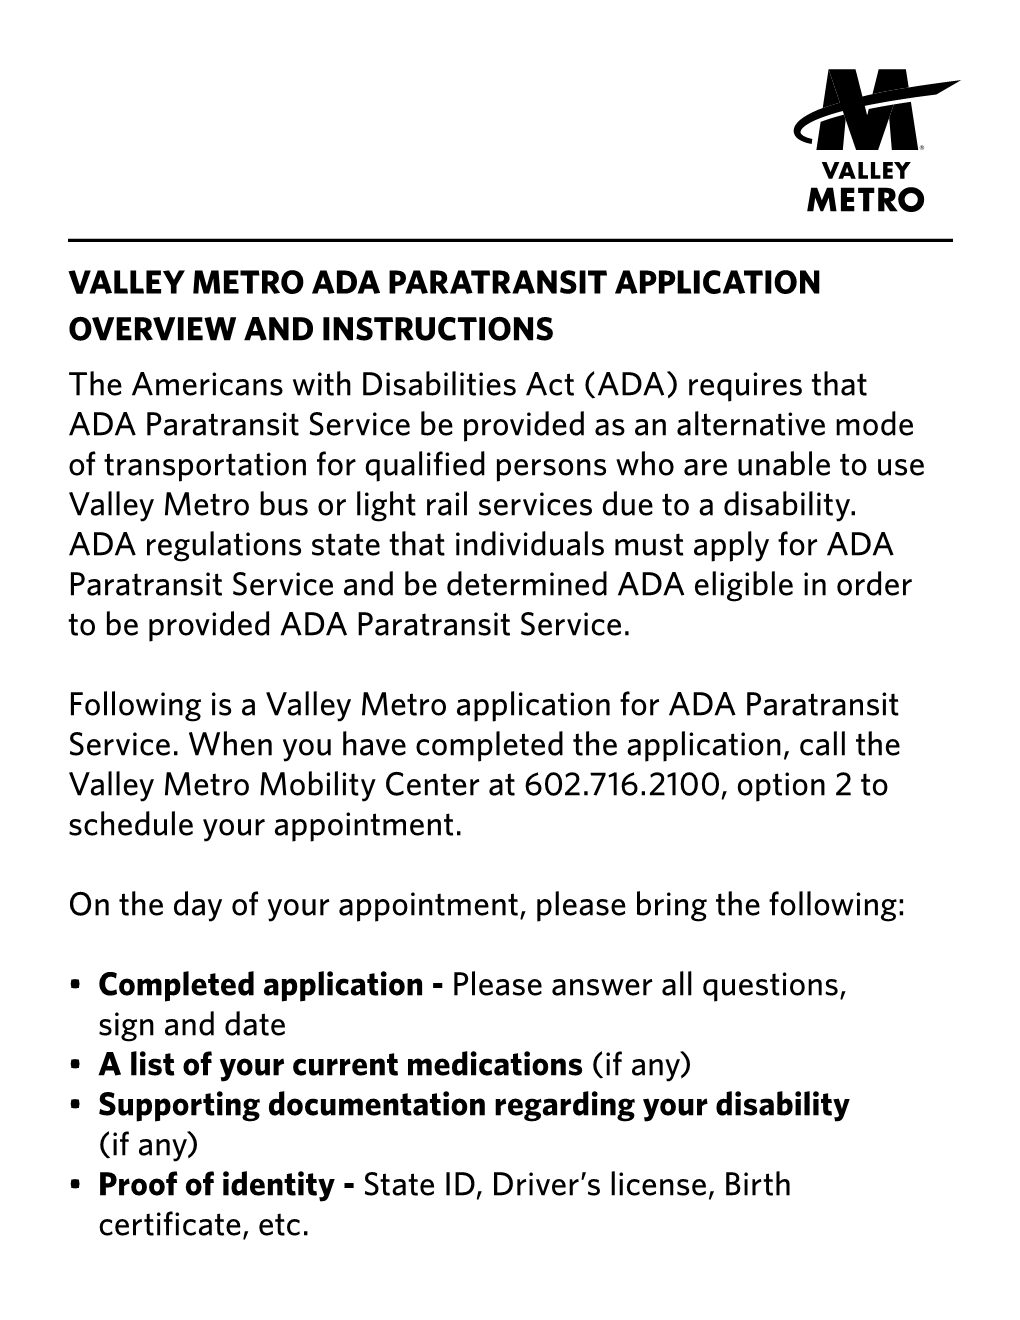 Requires That ADA Paratransit Service Be Provided As an Alternative Mode